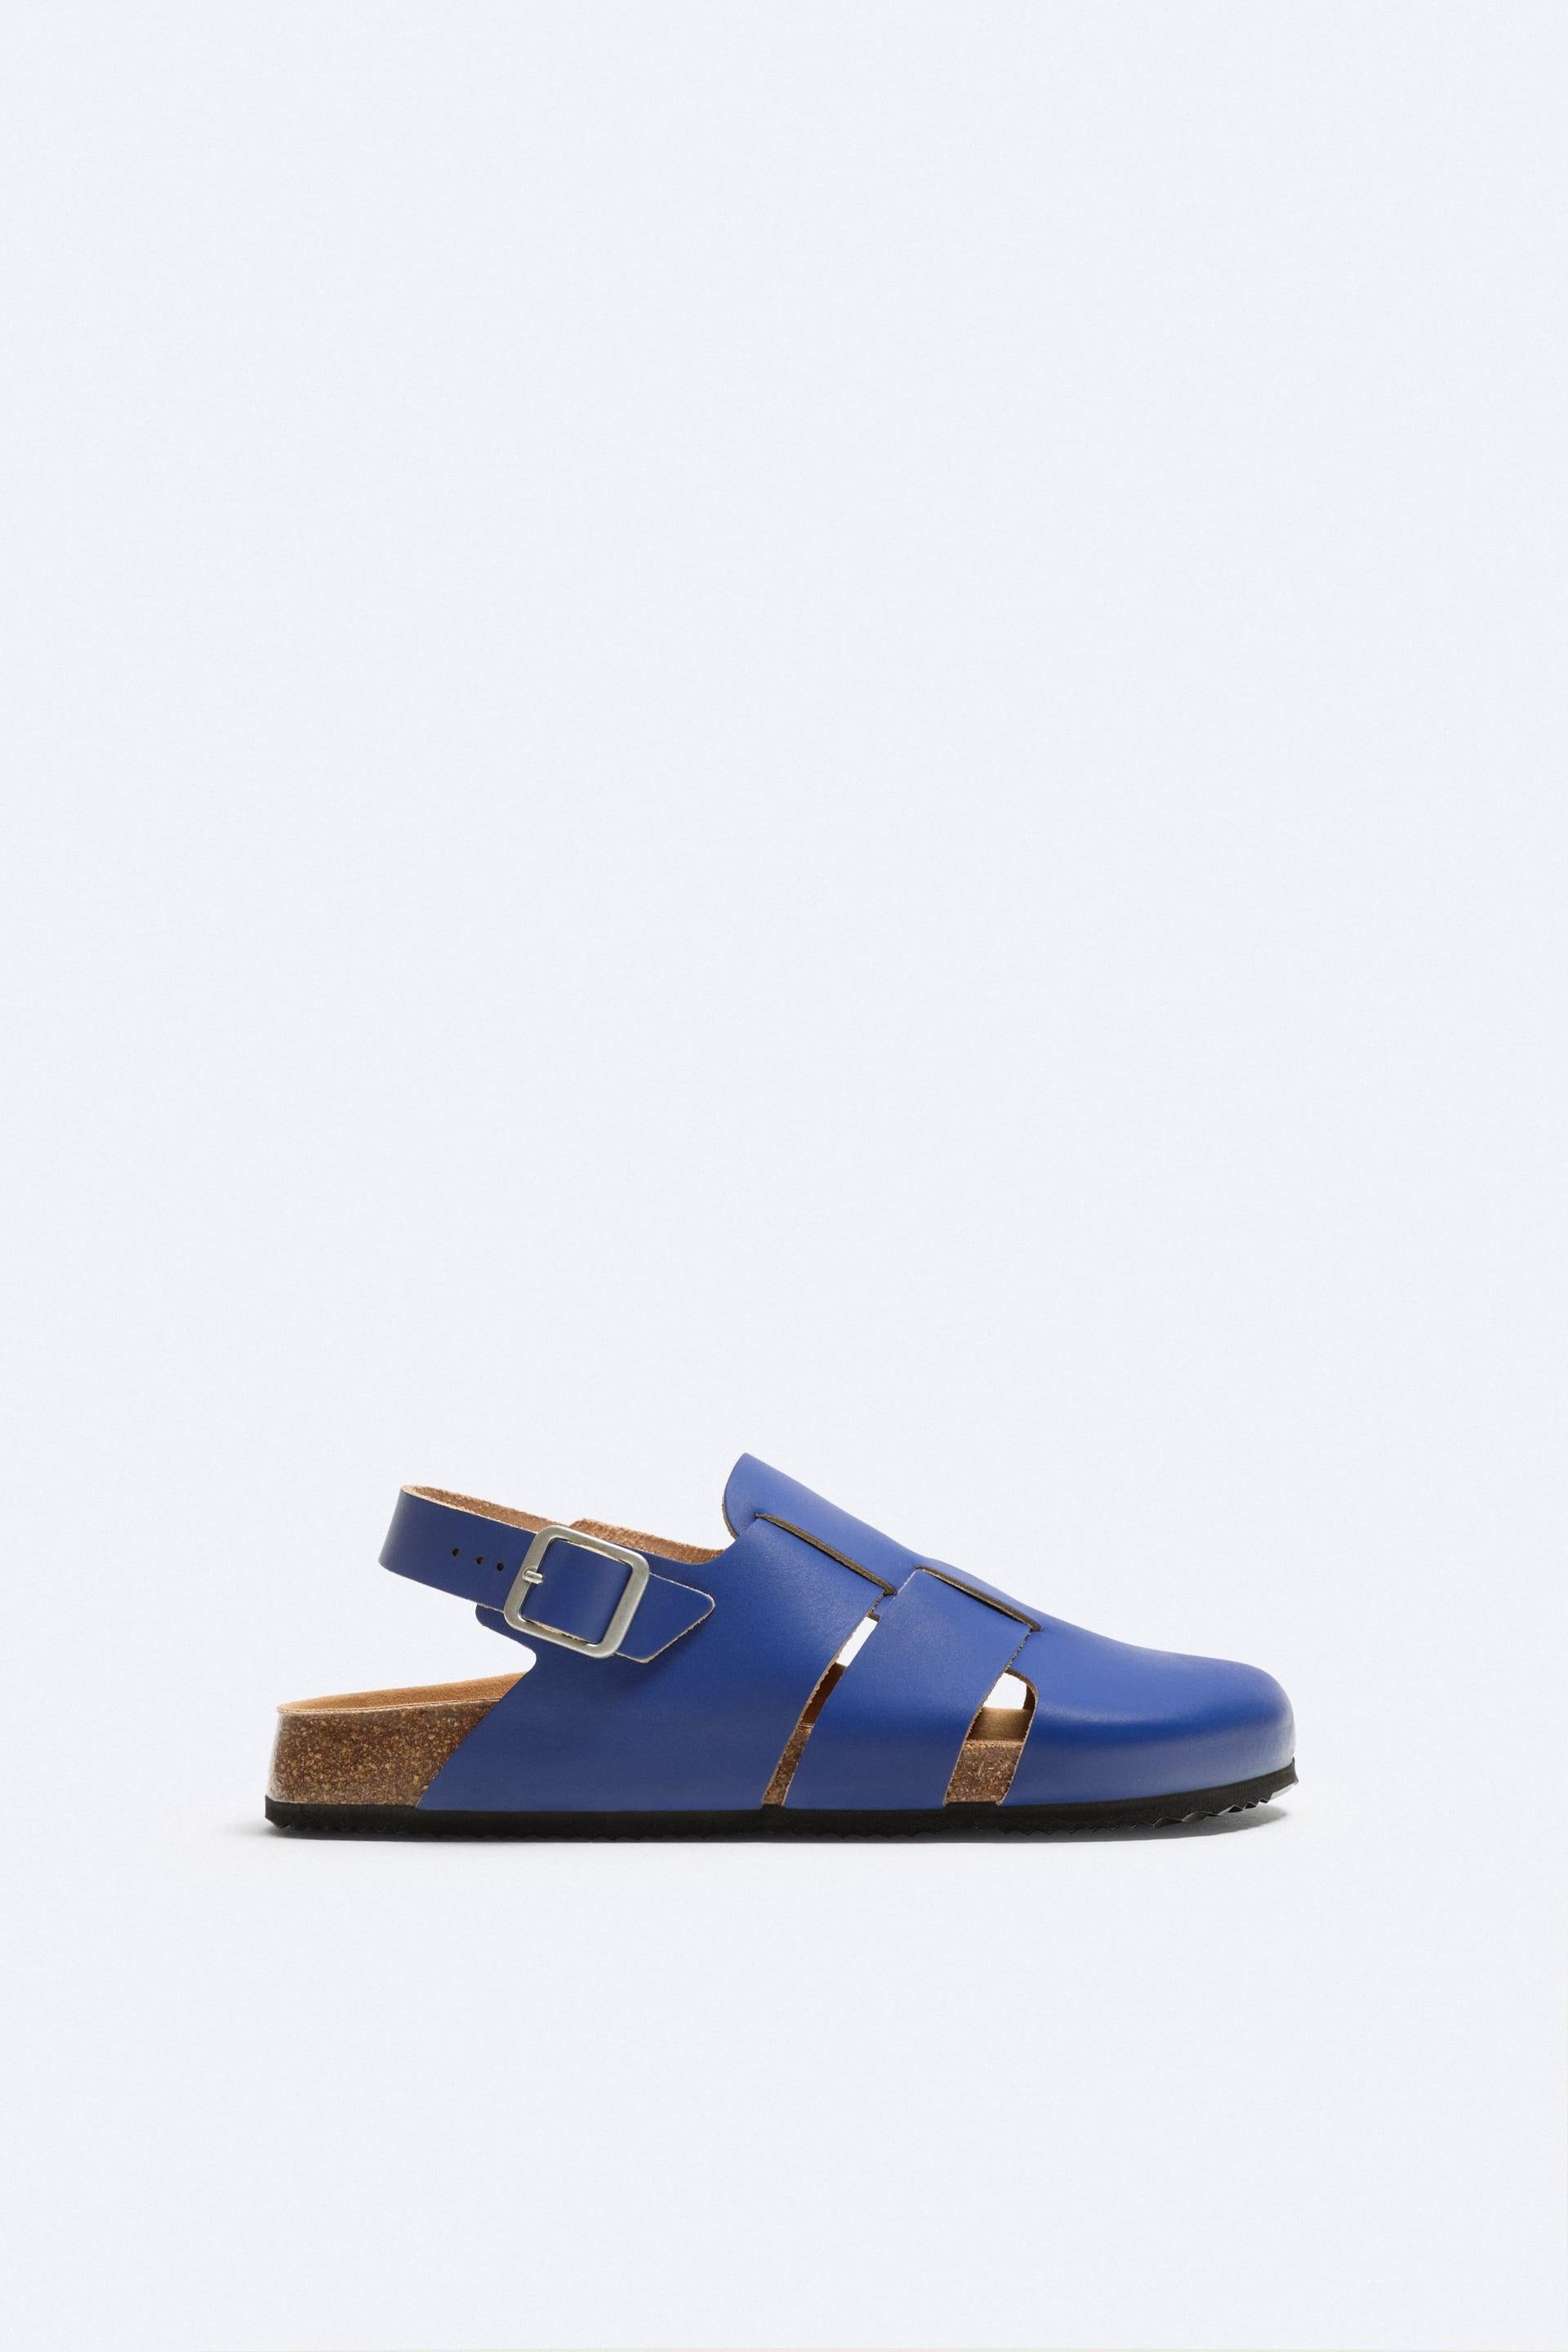 WOVEN LEATHER CLOGS by ZARA